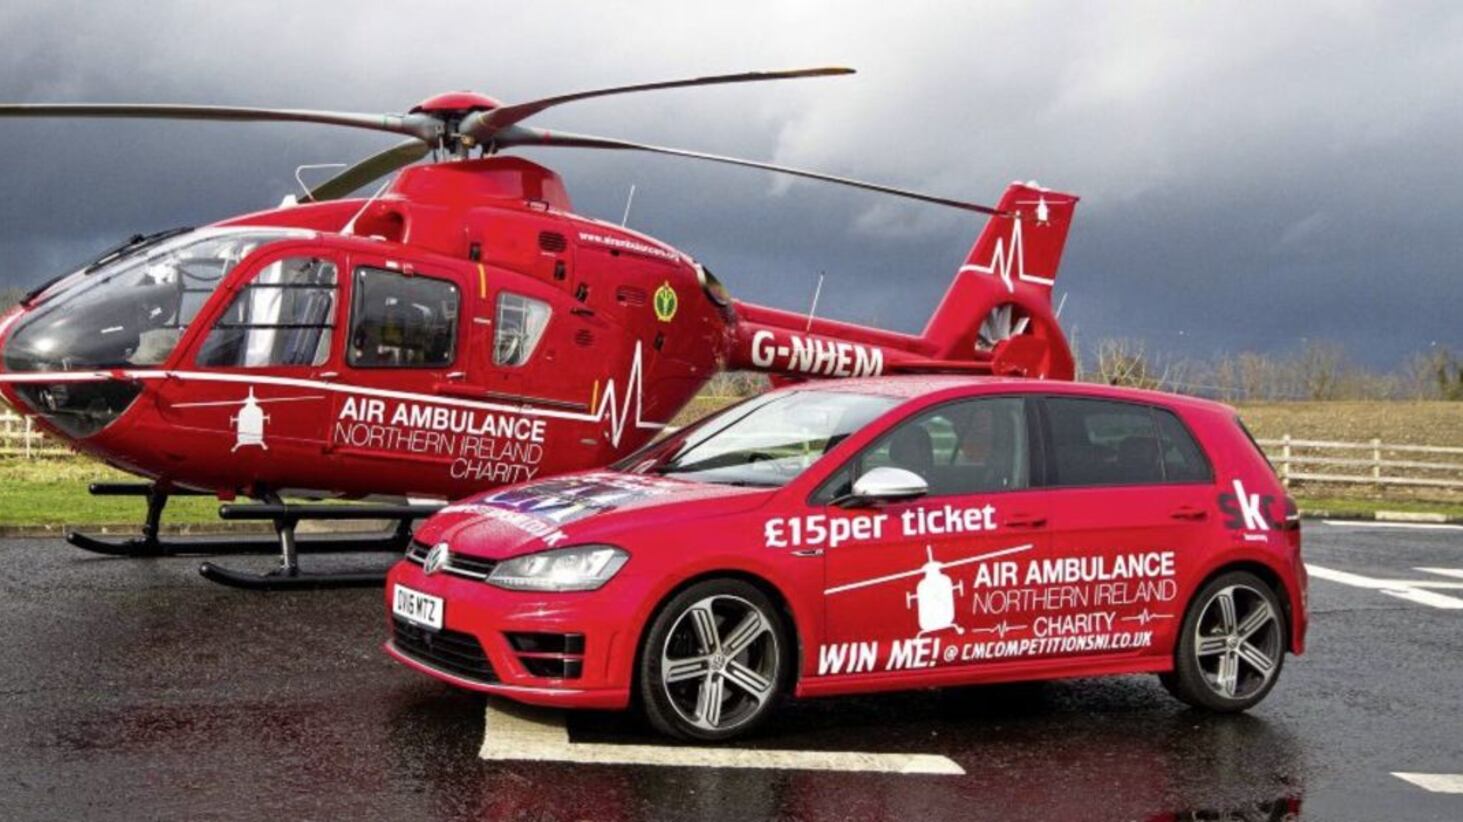 With the help of CM Competitions NI Ltd and 80 sponsors, a 2016 Volkswagen Golf R is up for grabs in a charity draw, with the net profits from ticket entries going to the Air Ambulance 